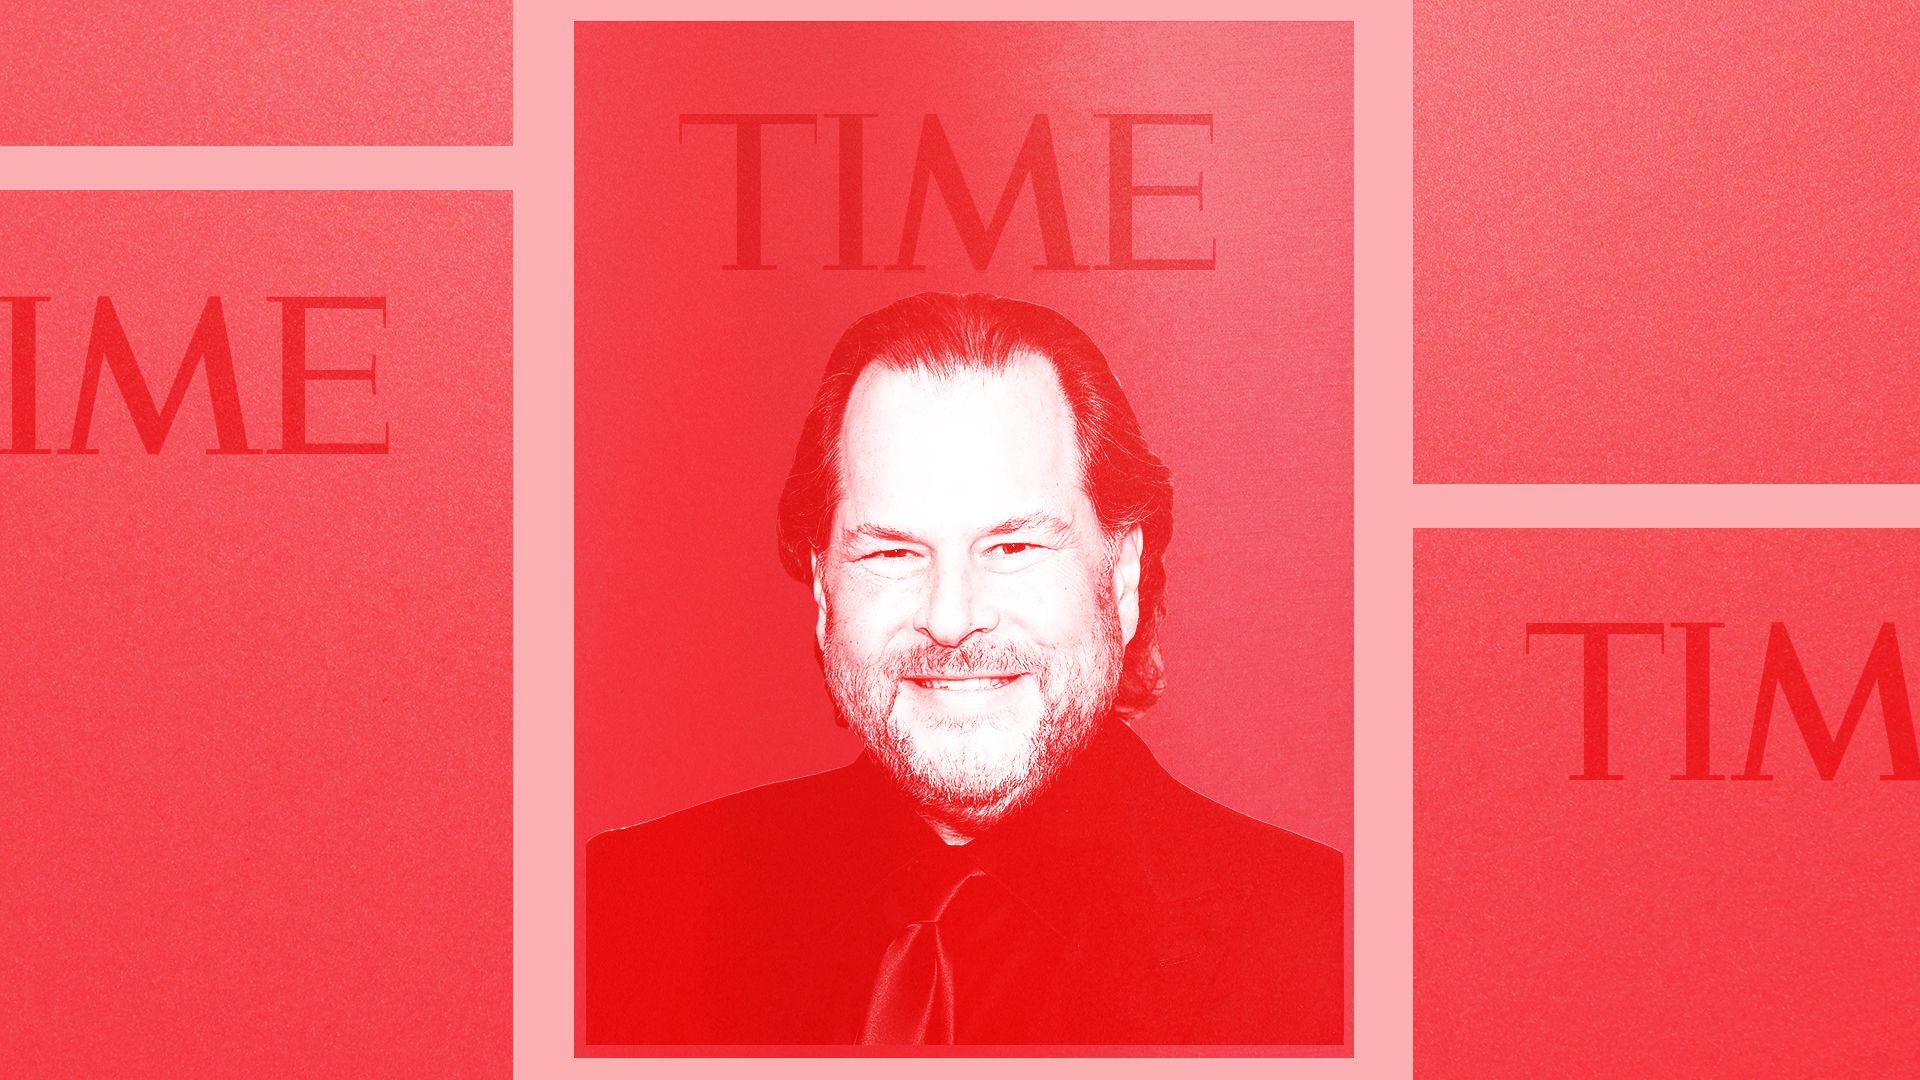 Photo illustration of Marc Benioff on a red square surrounded by other red squares, all resembling Time Magazines